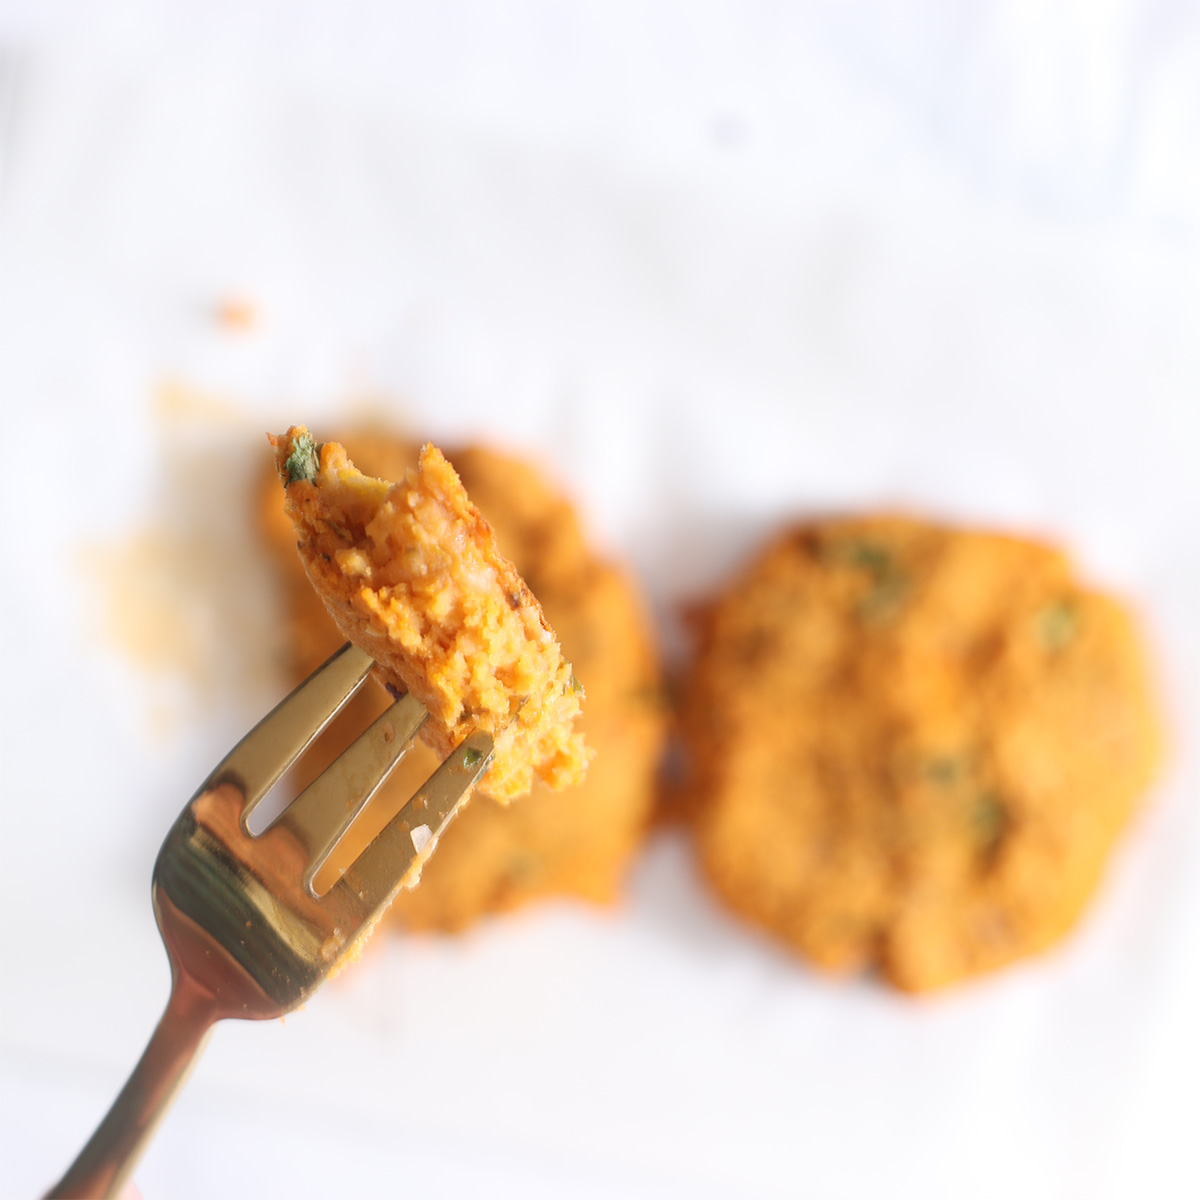 baked chickpea burgers with a bite on a fork.